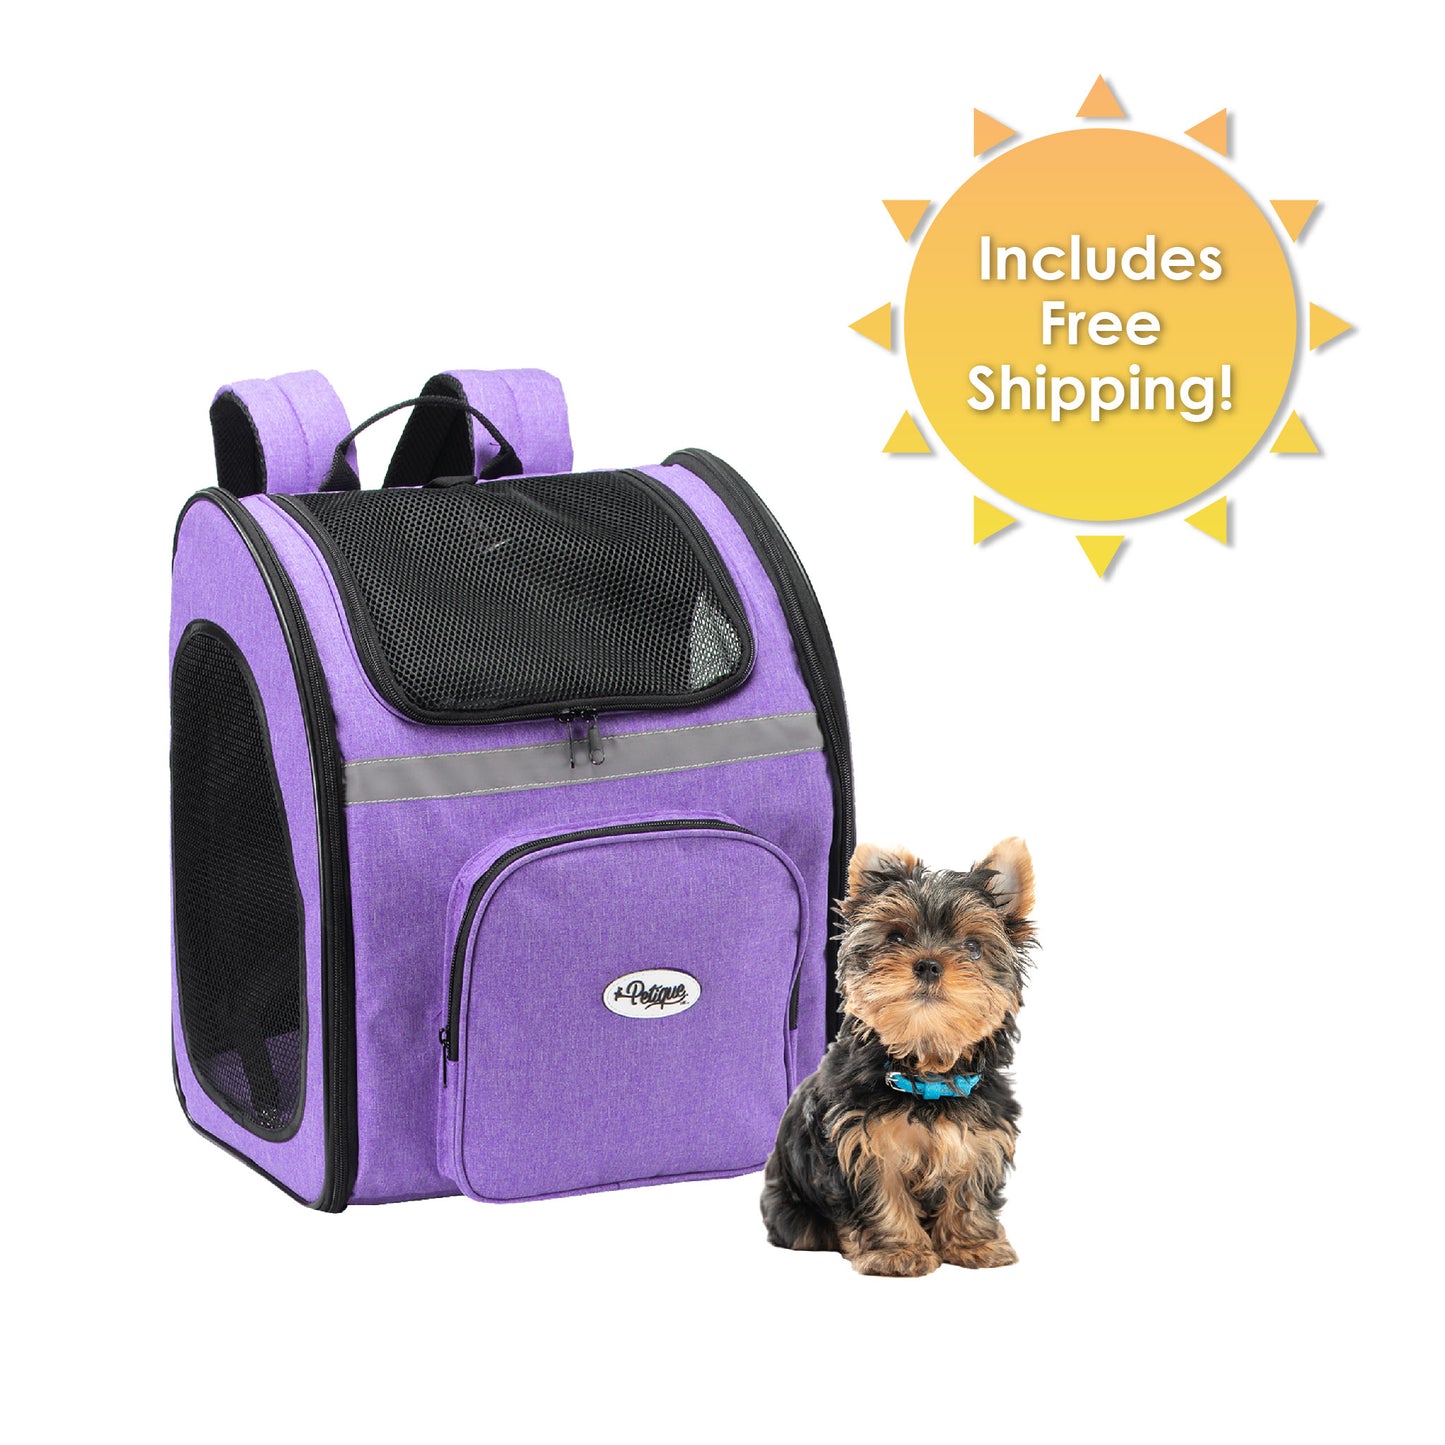 The Backpacker Pet Carrier for Small Dogs/Cats/Pets, Storage Pocket, Luggage Handle Slit, Leash Inside, Adjustable Straps, Reversible Mat, 3 Entryways, Folds Flat, Reflective Strip